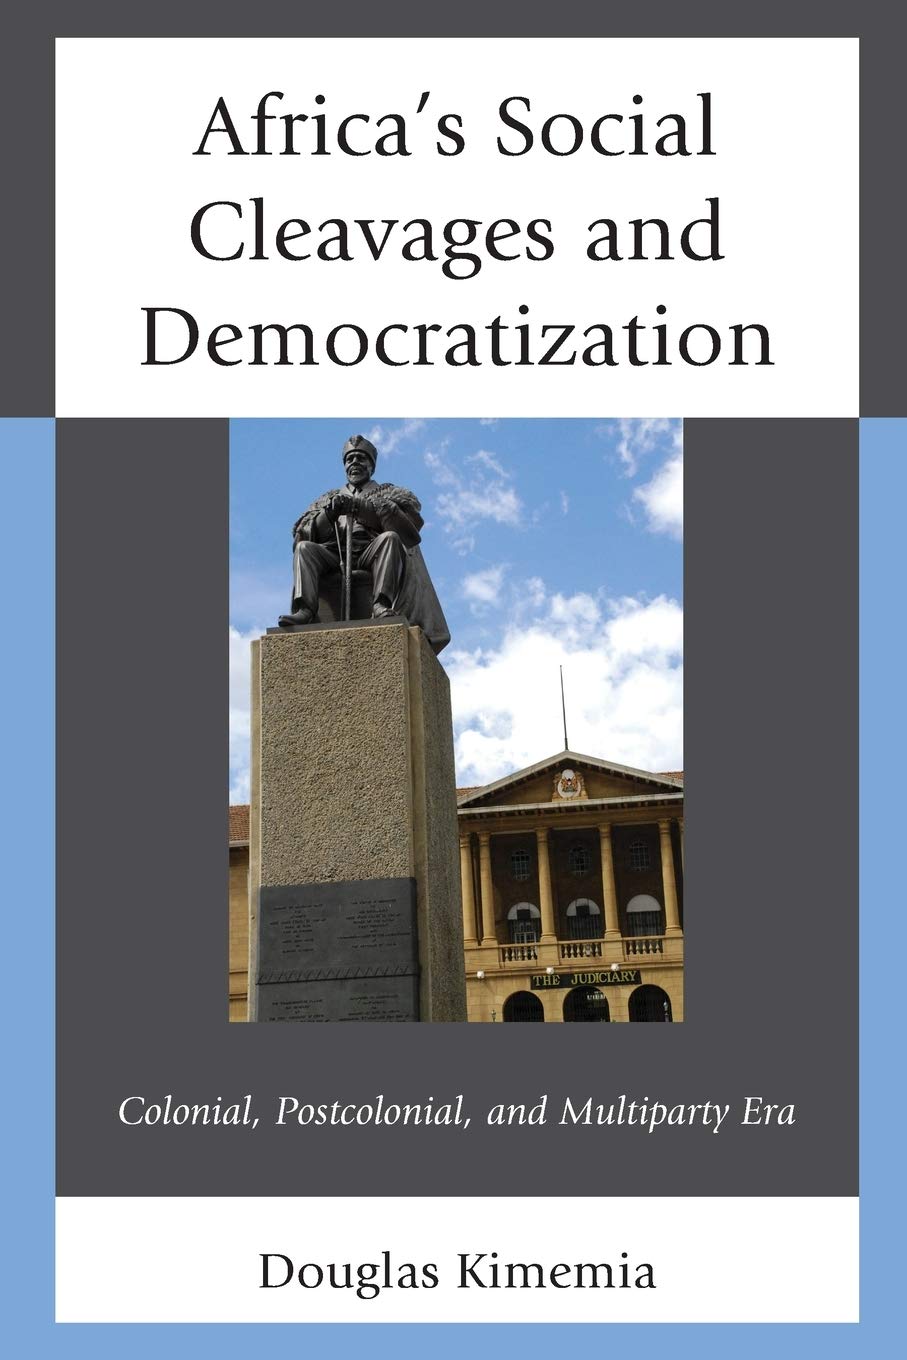 AFRICA'S SOCIAL CLEAVAGES AND DEMOCRATIZATION - Virginia Book Company